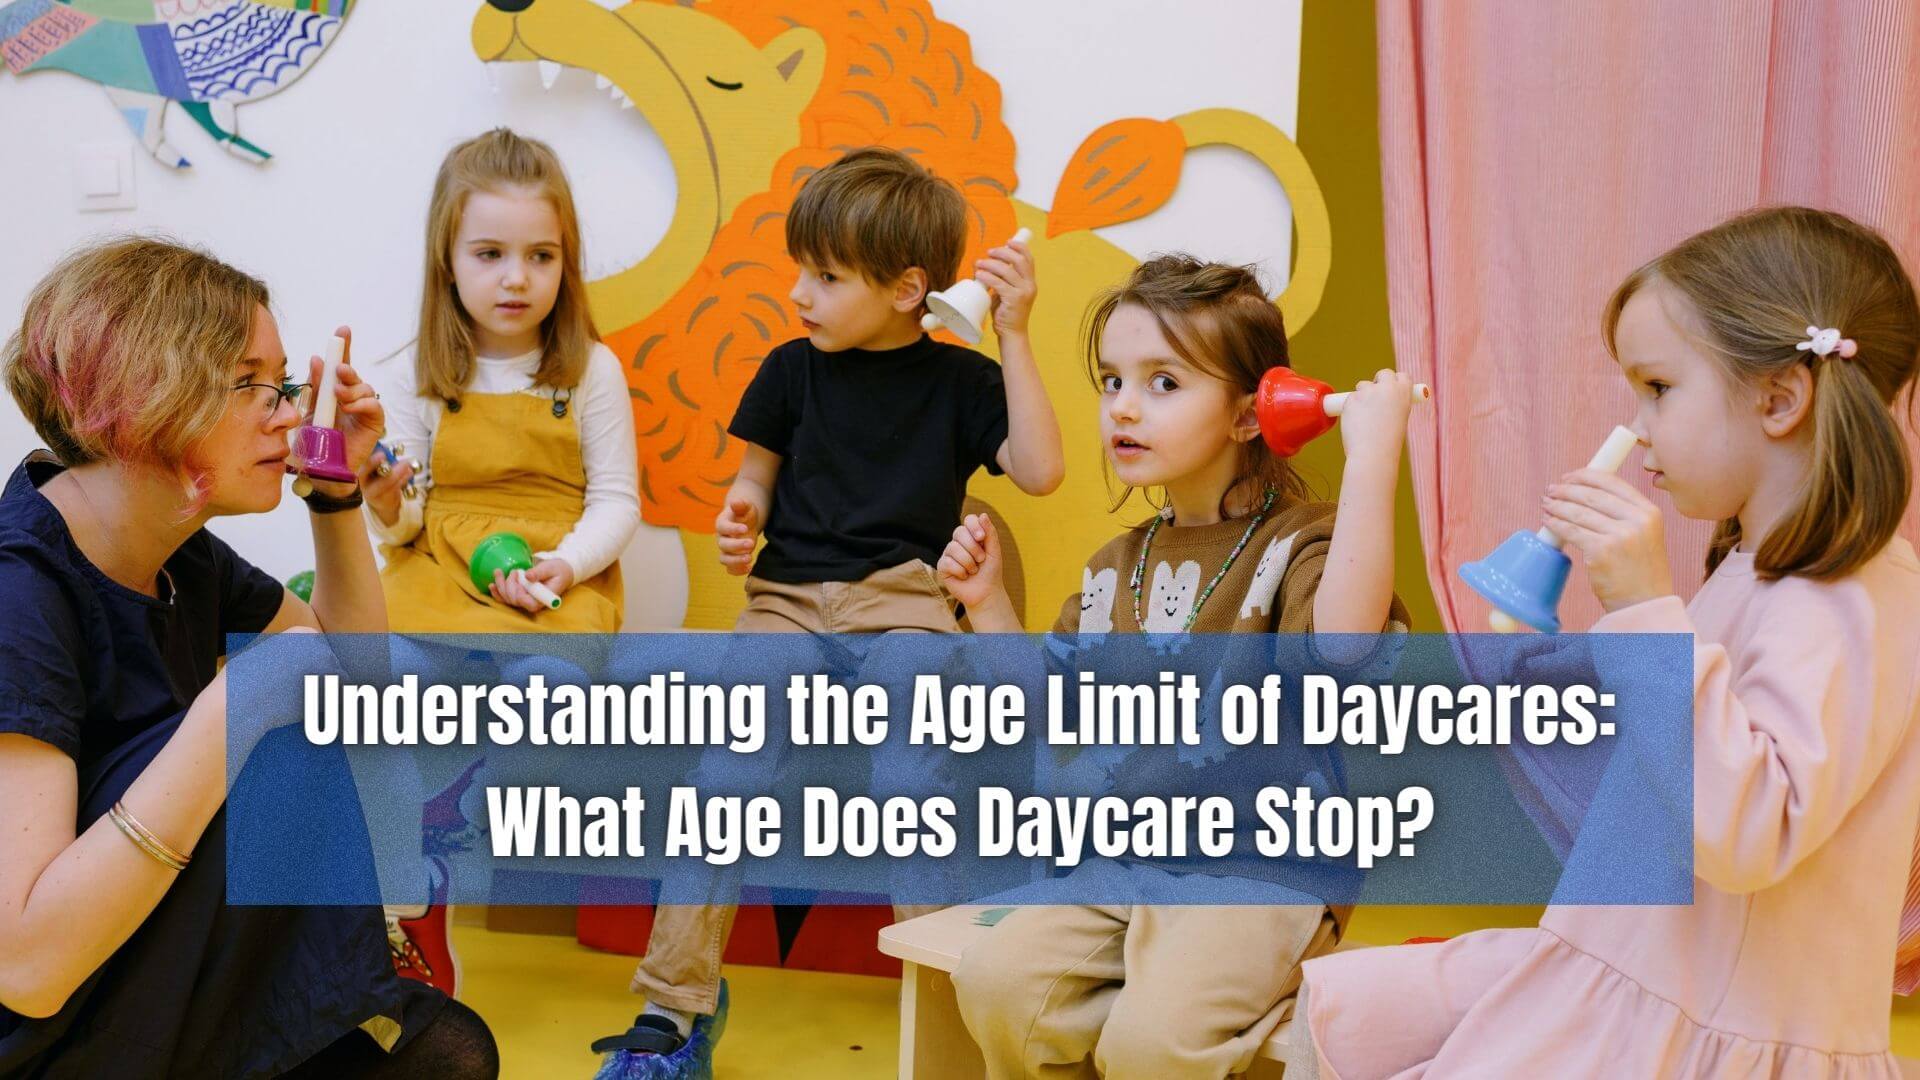 Age Limit of Daycares: What Age Does Daycare Stop?